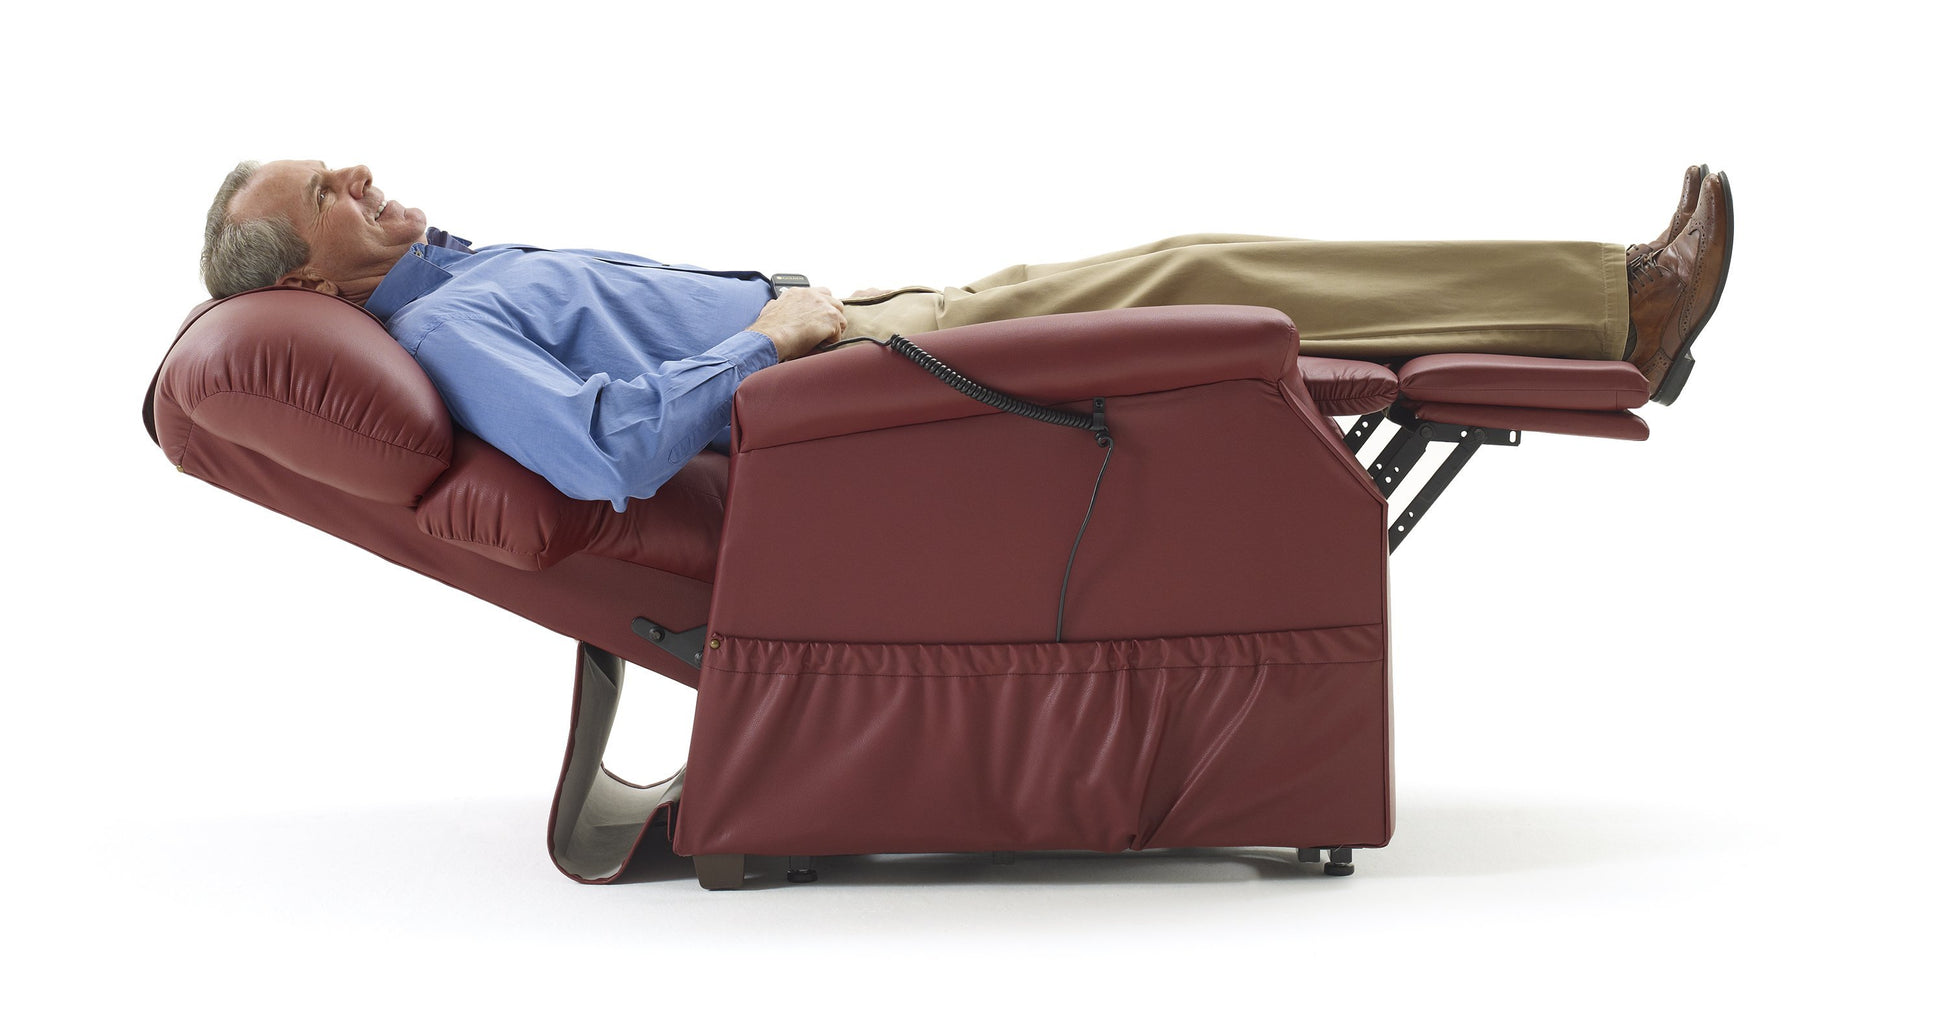 Lift chair with sleeping position